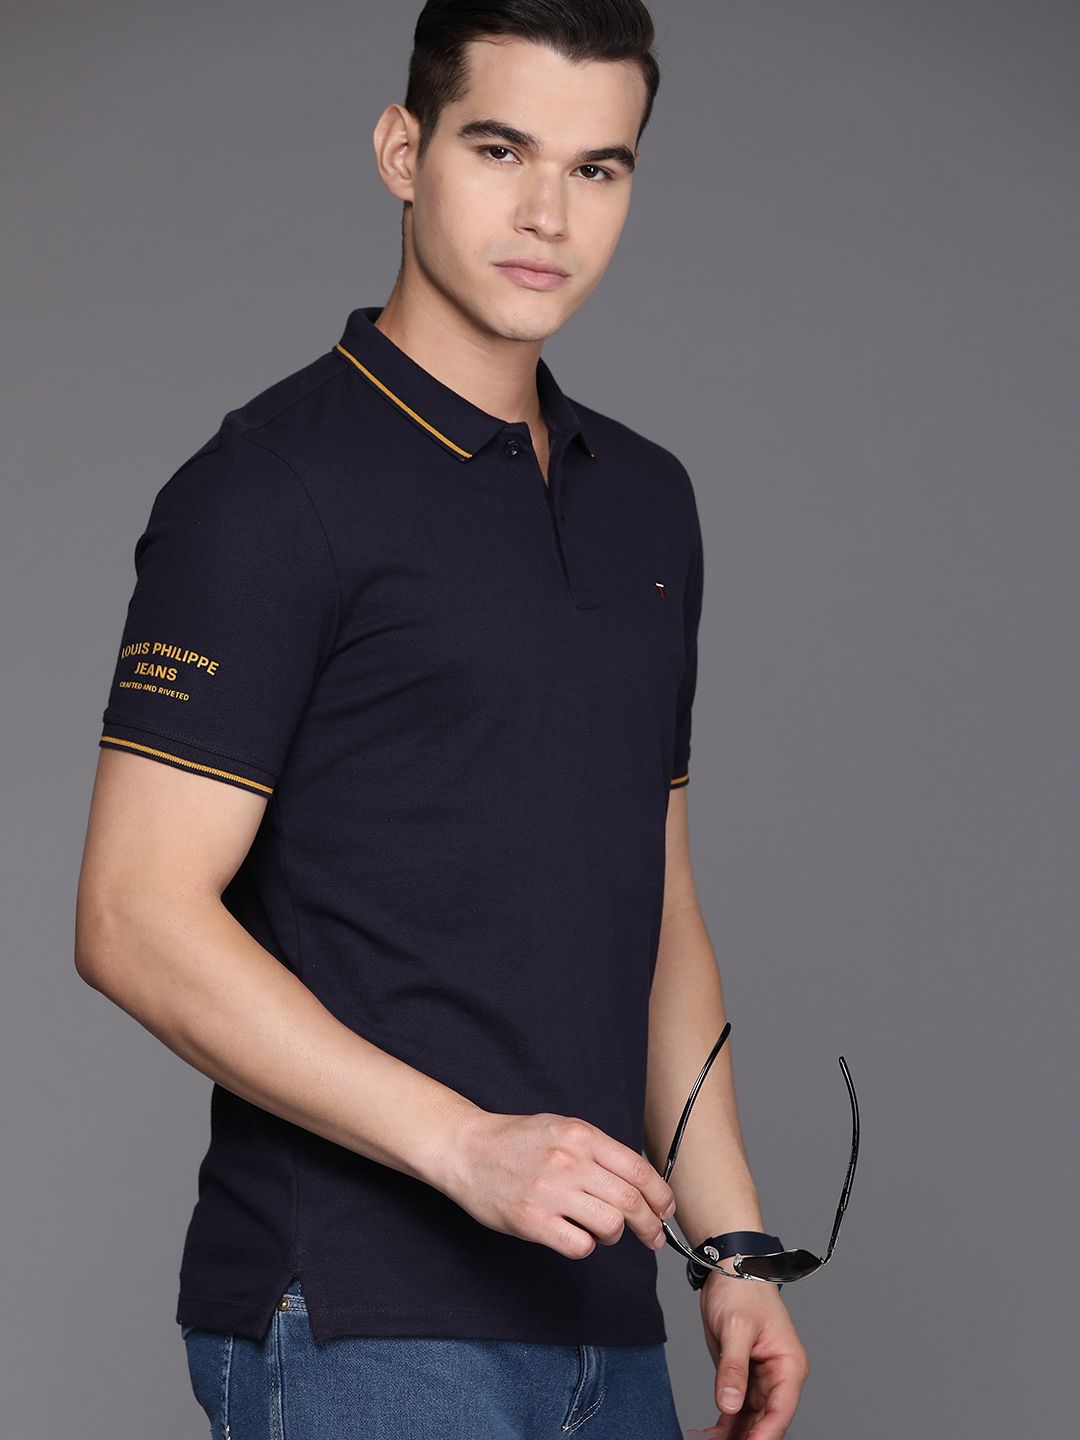 Louis Philippe Jeans Polo Collar Slim Fit T-shirt - Price History